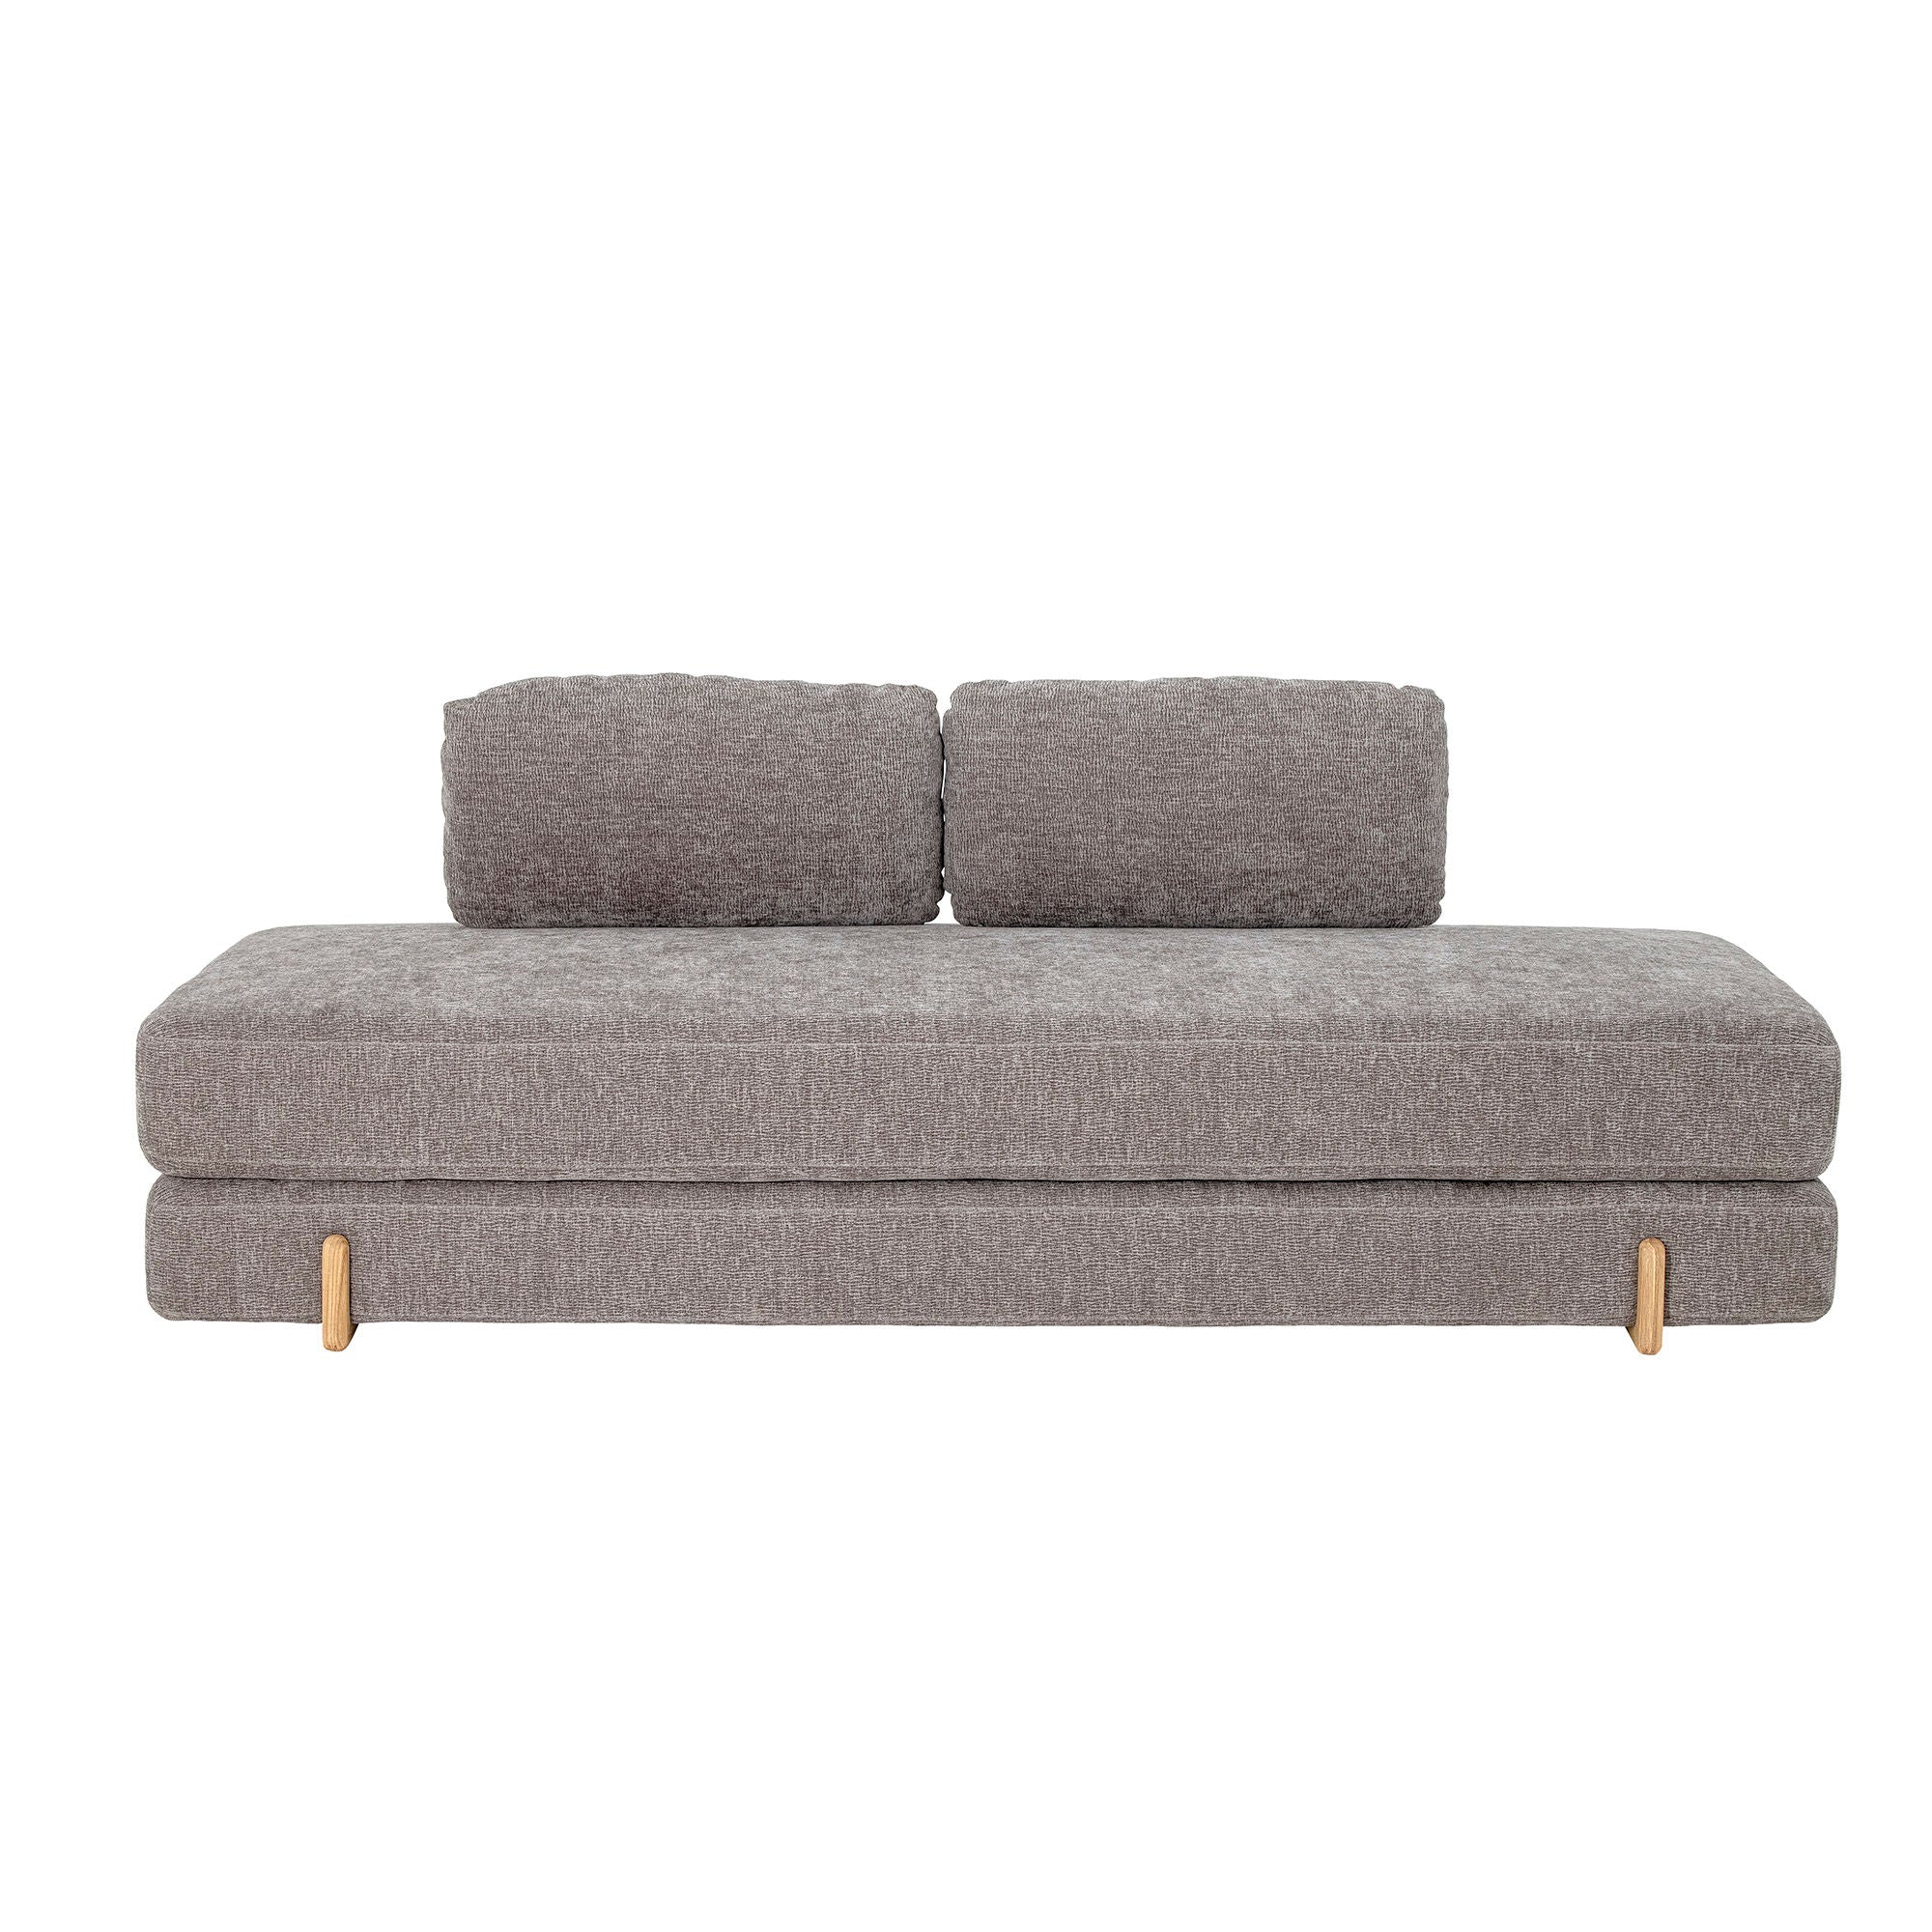 Bloomingville Groove Daybed, grijs, polyester